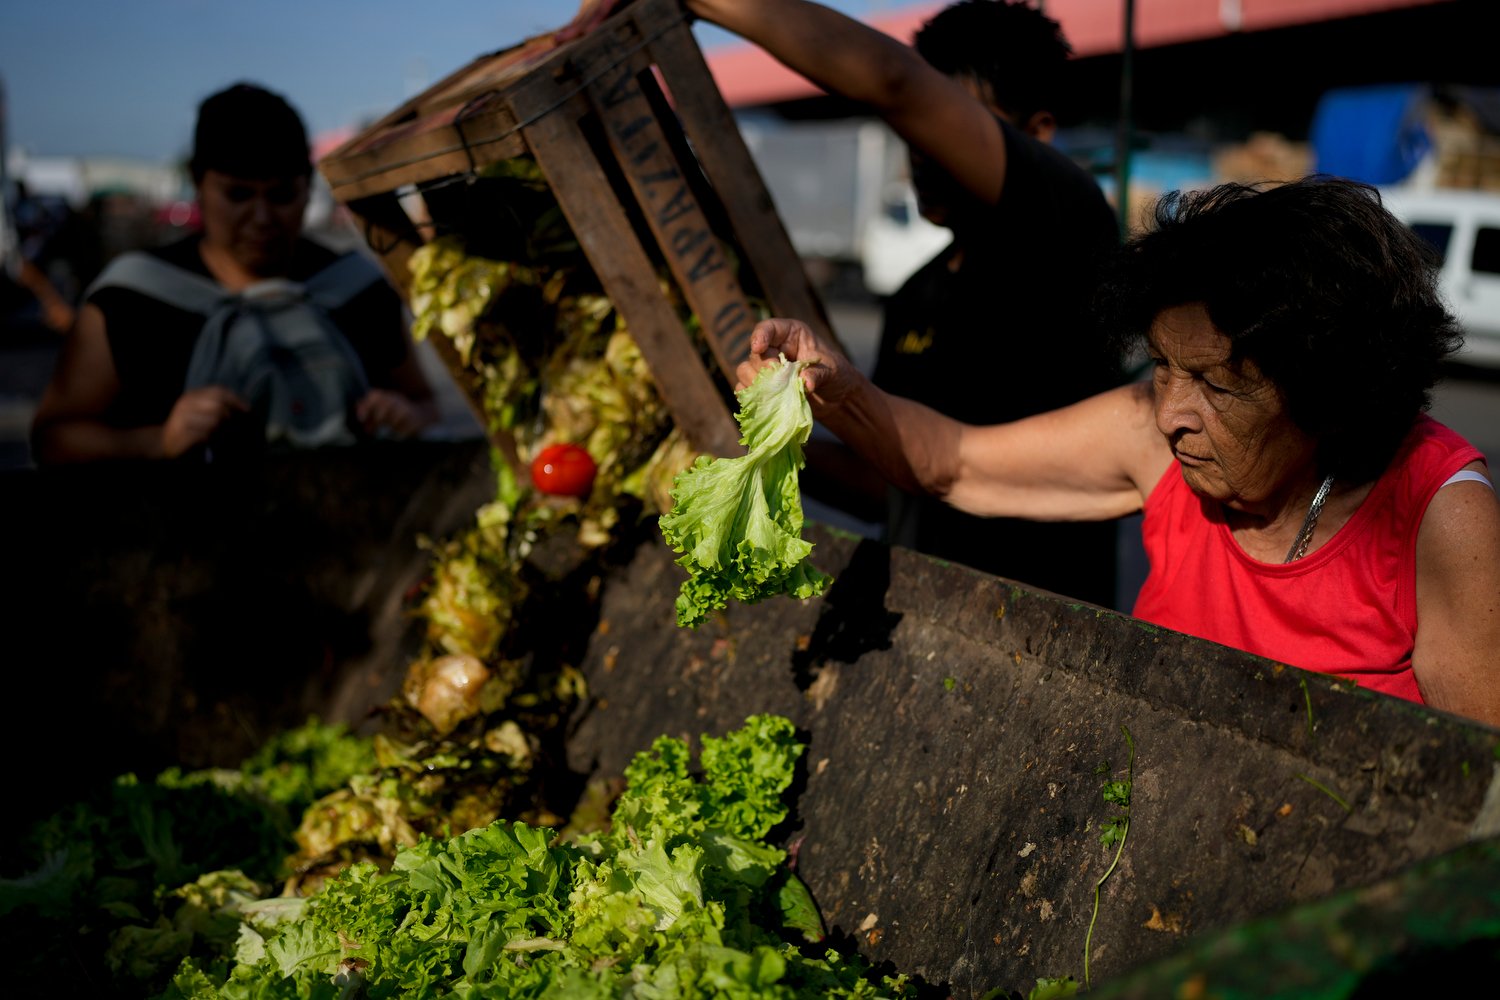  A woman culls through produce discarded by vendors at a market on the outskirts of Buenos Aires, Argentina, Jan. 10, 2024, as the annual inflation rate soared past 200%. (AP Photo/Natacha Pisarenko) 